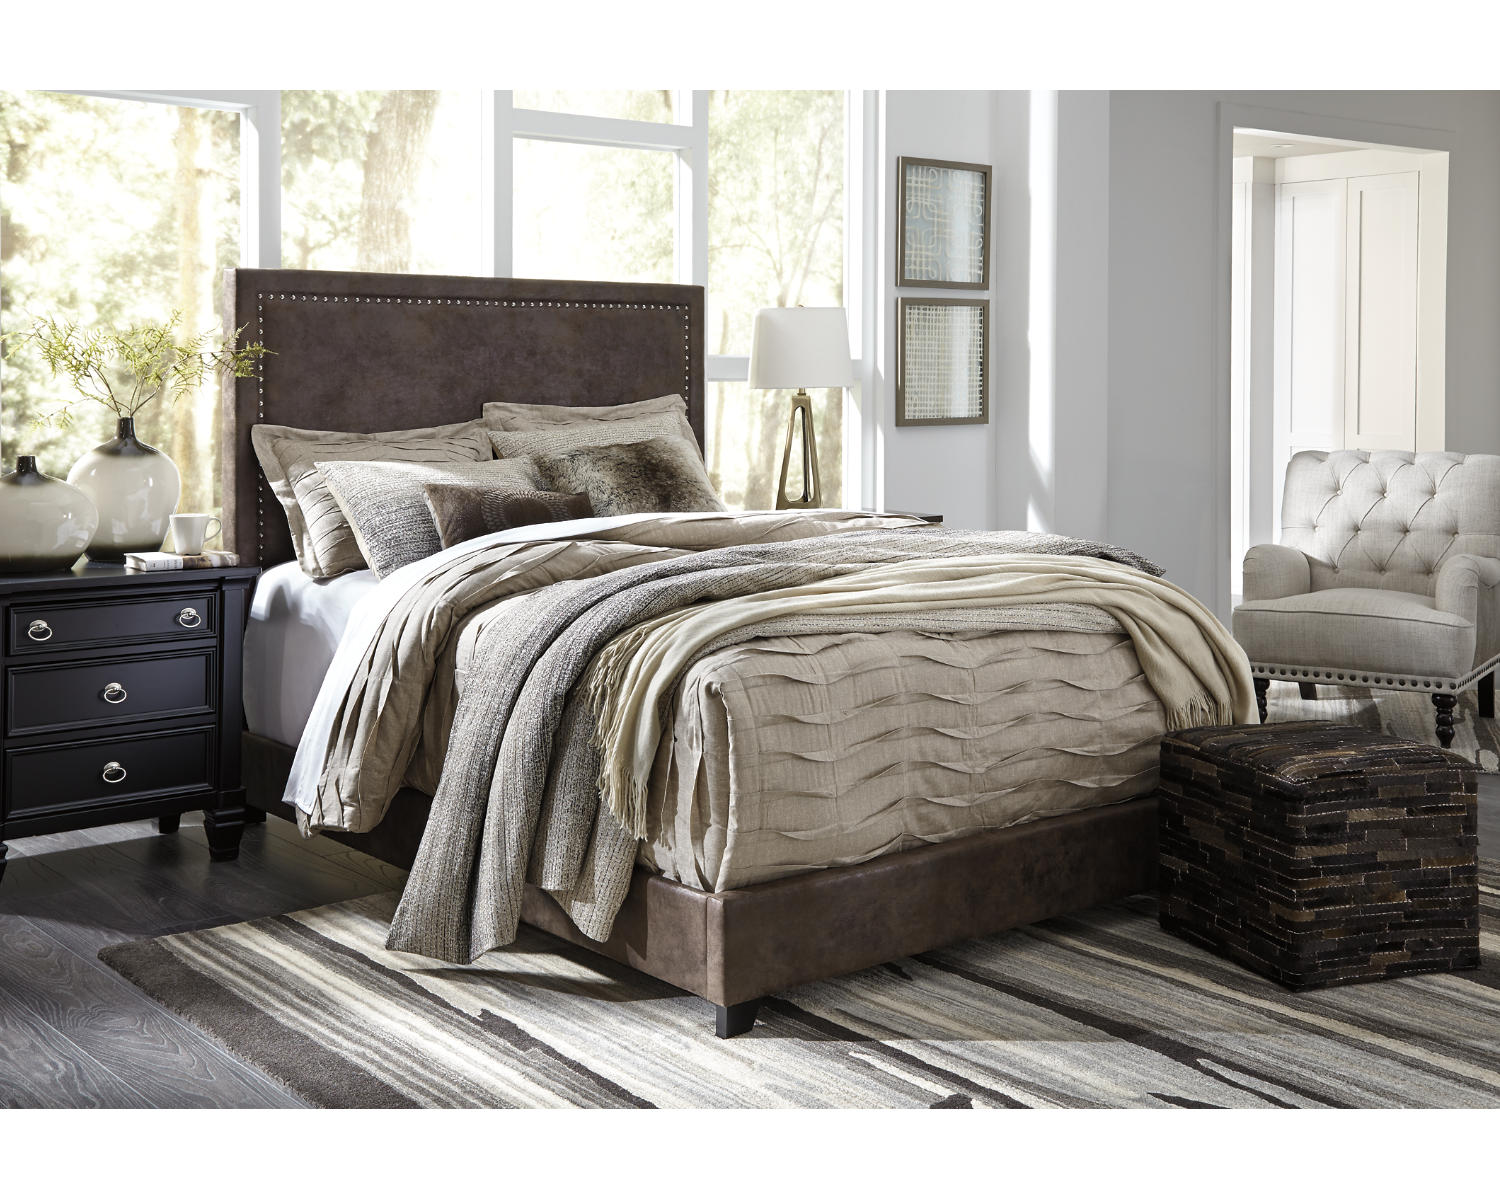 Signature Design by Ashley Dolante Contemporary Faux Leather Upholstered Platform Bed, Queen, Brown - image 3 of 8